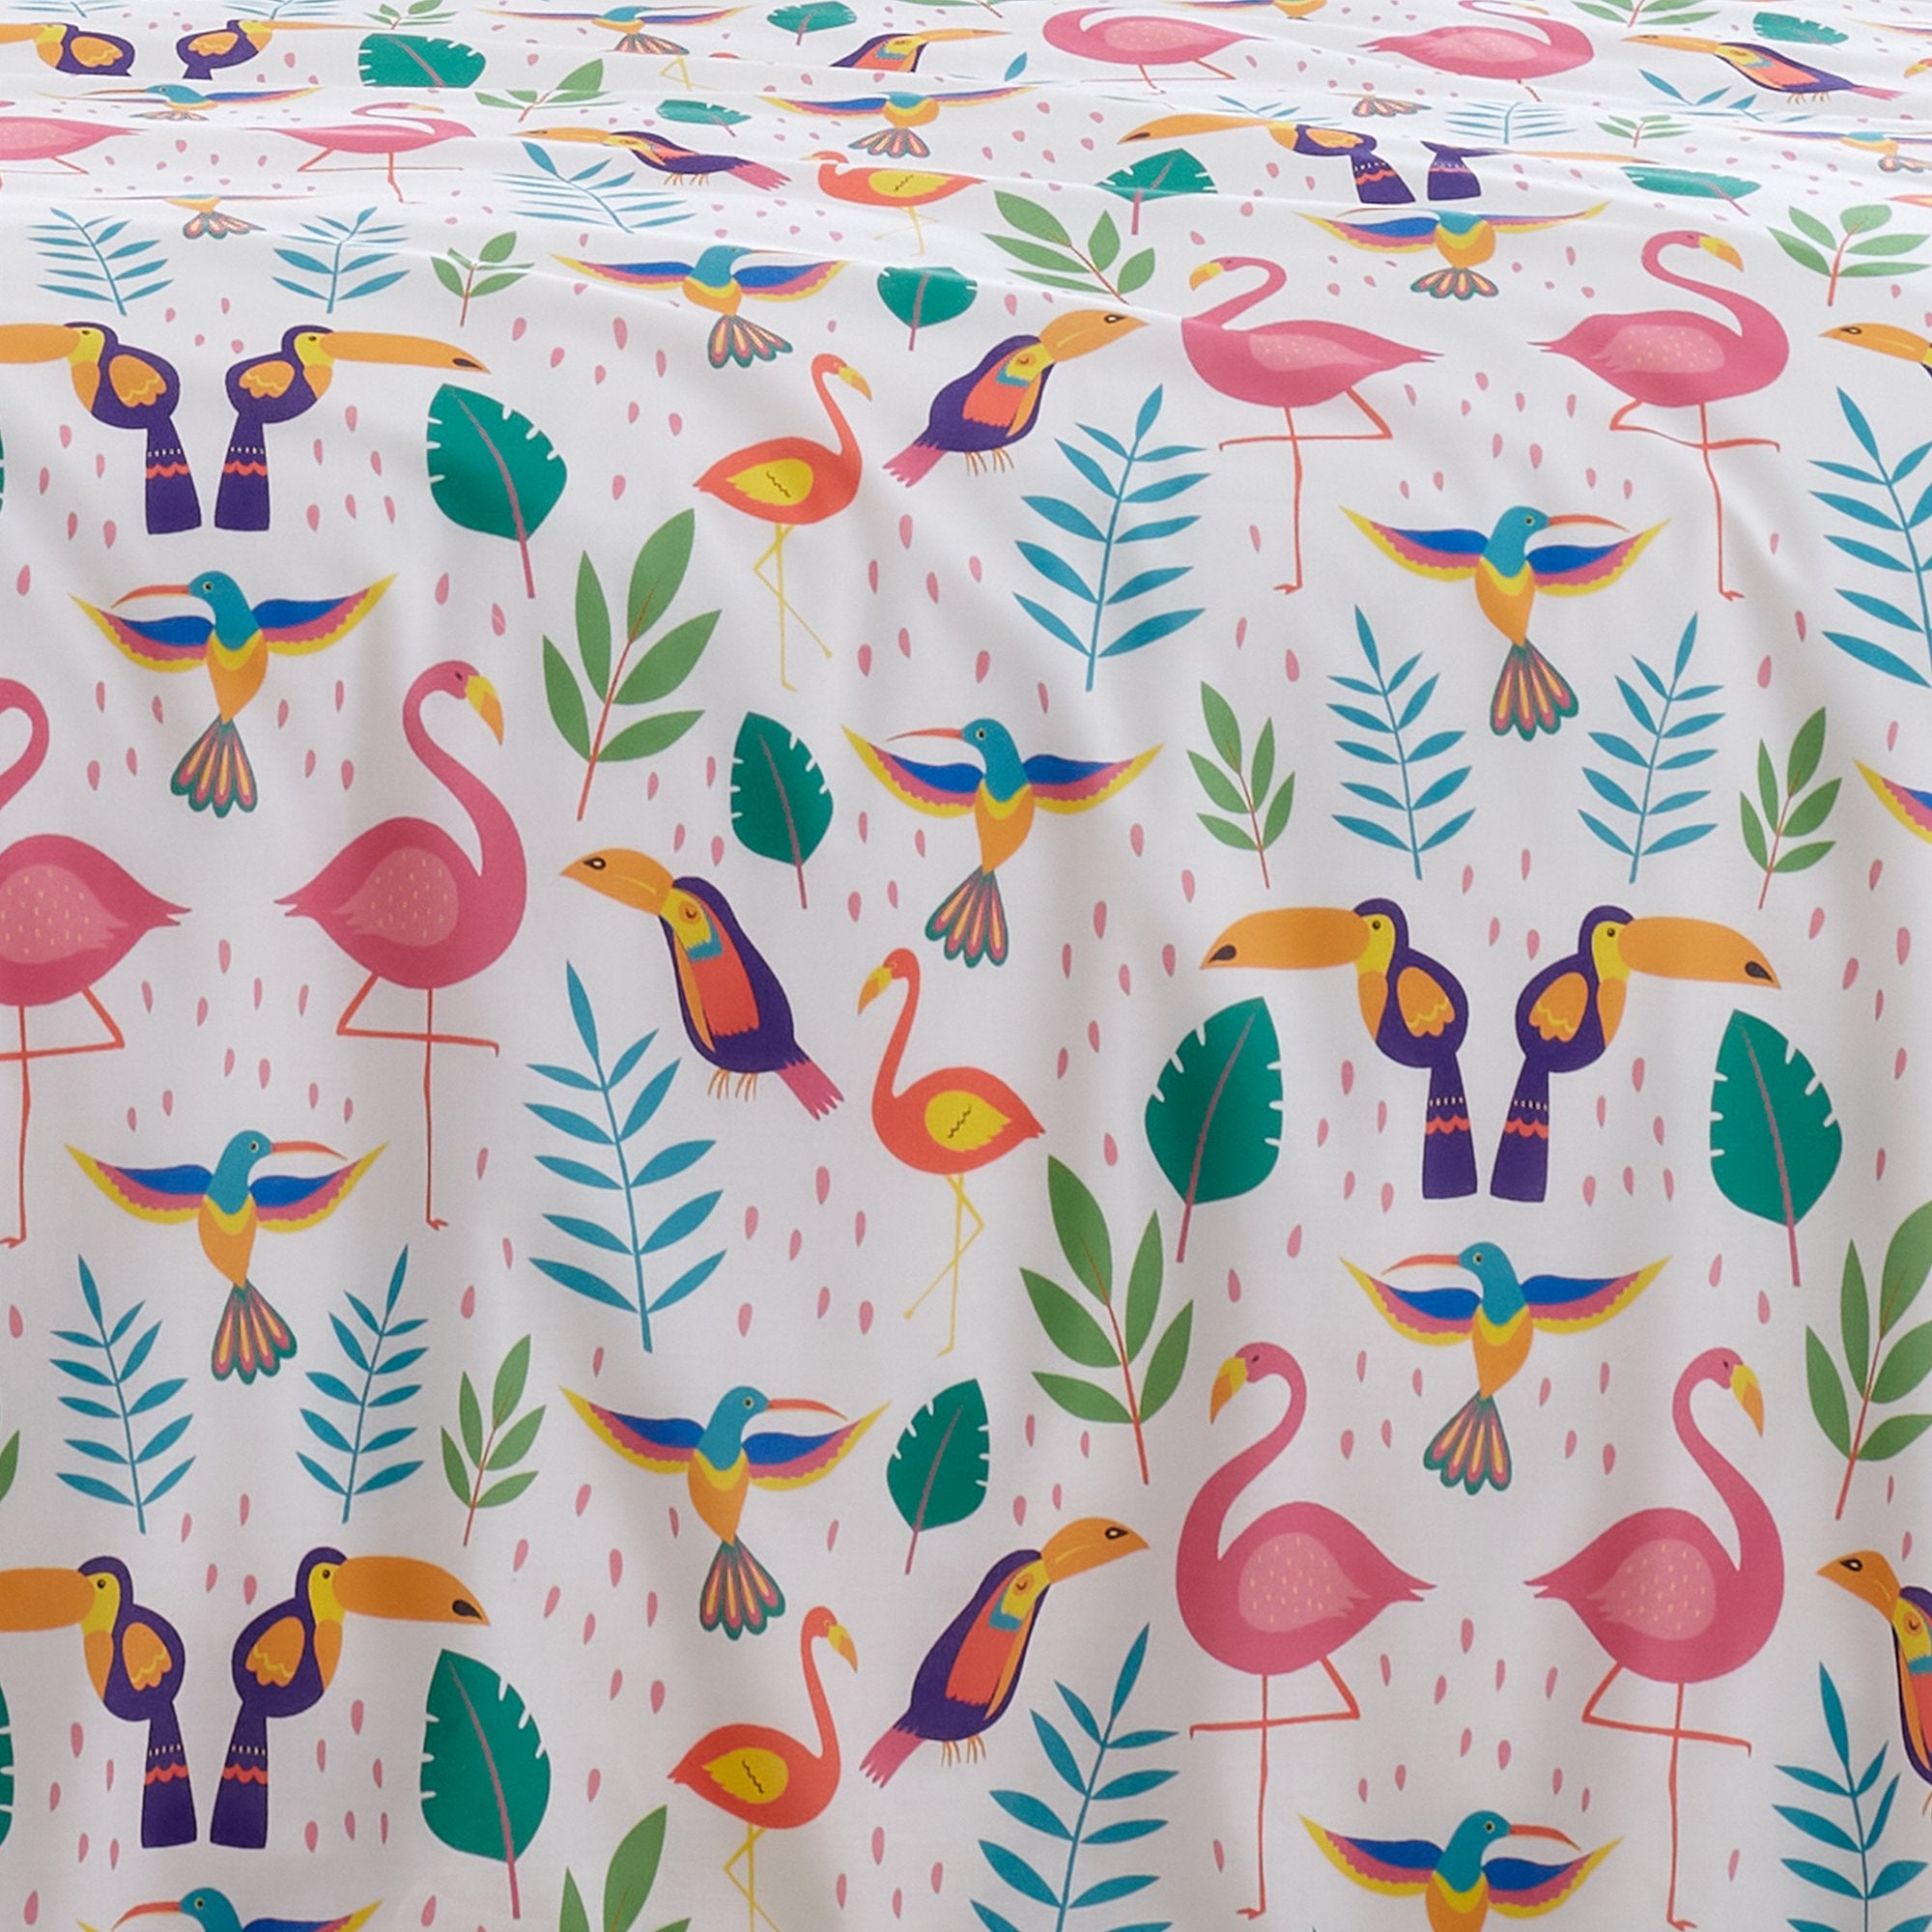 Duvet Cover Set Tropical Flamingo by Fusion in Pink